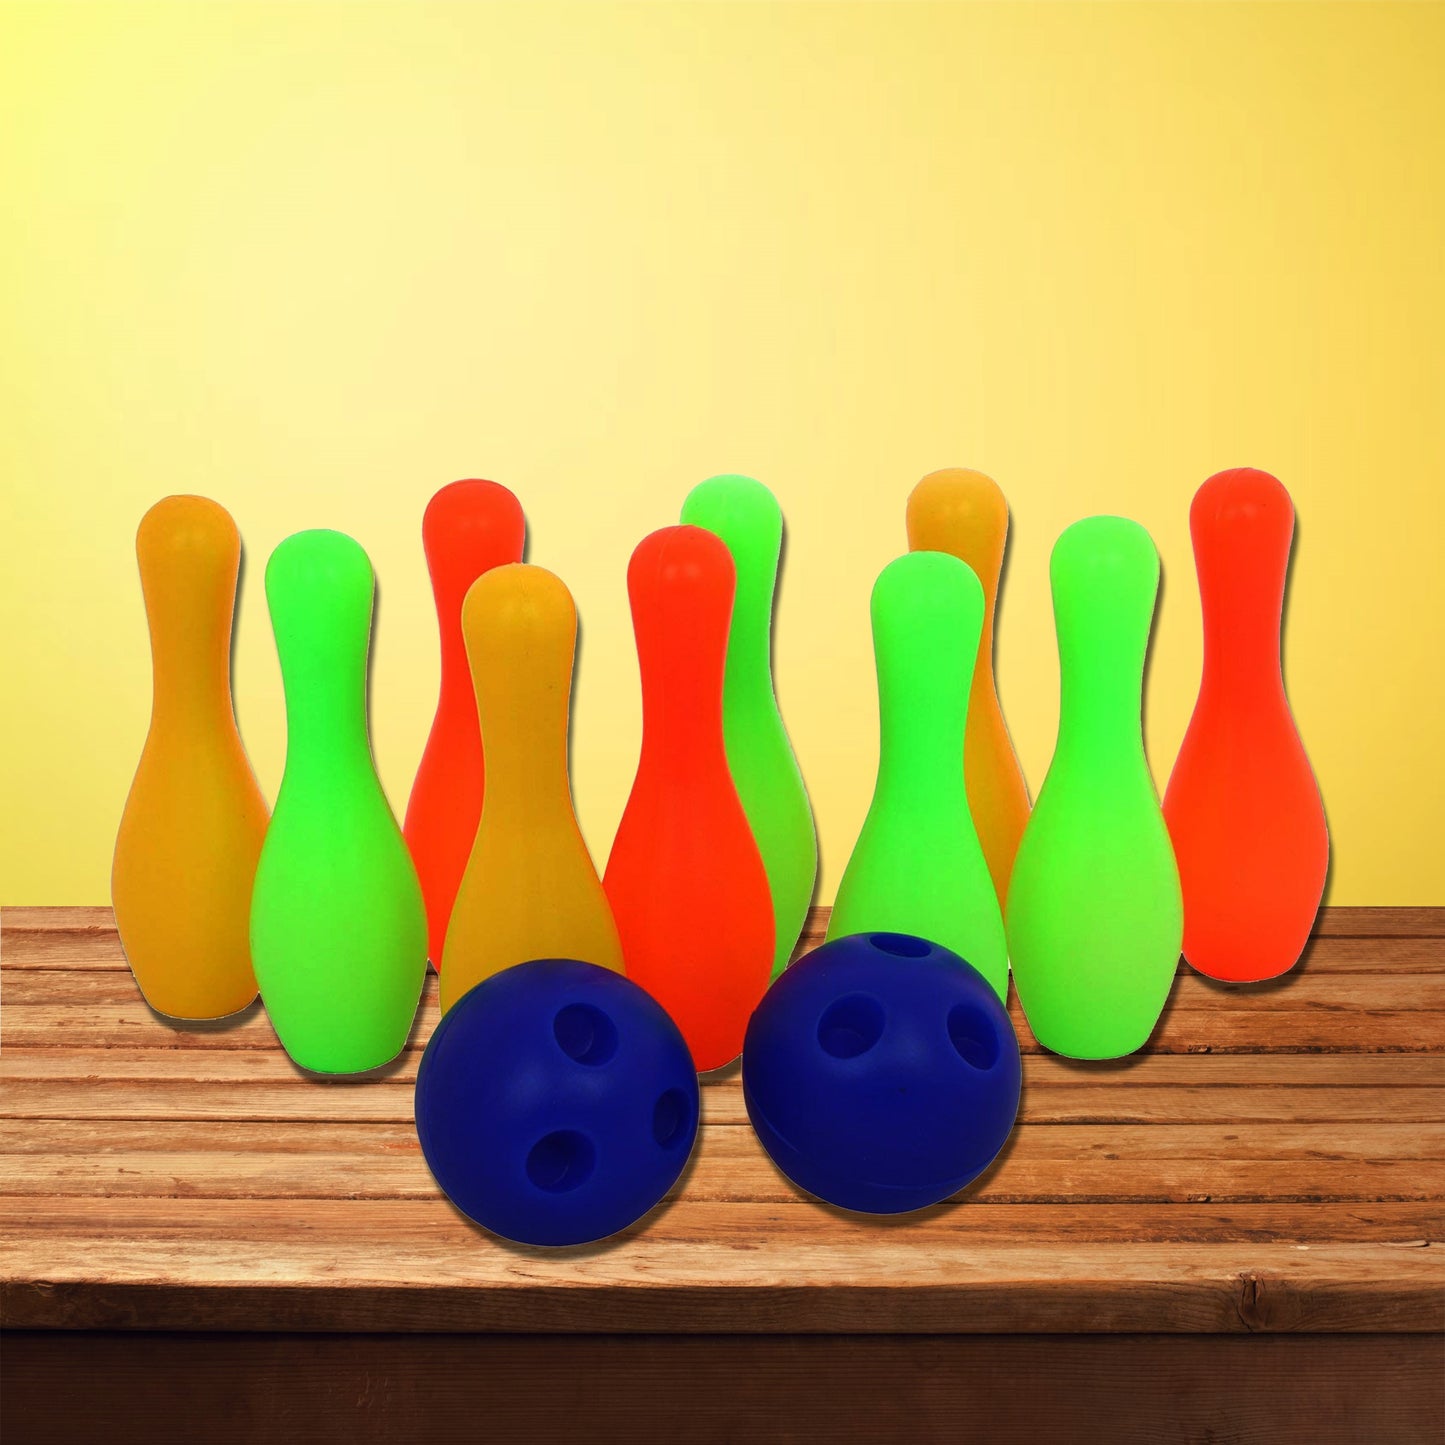 Plastic Bowling Set Game with 10 bottles & 2 balls